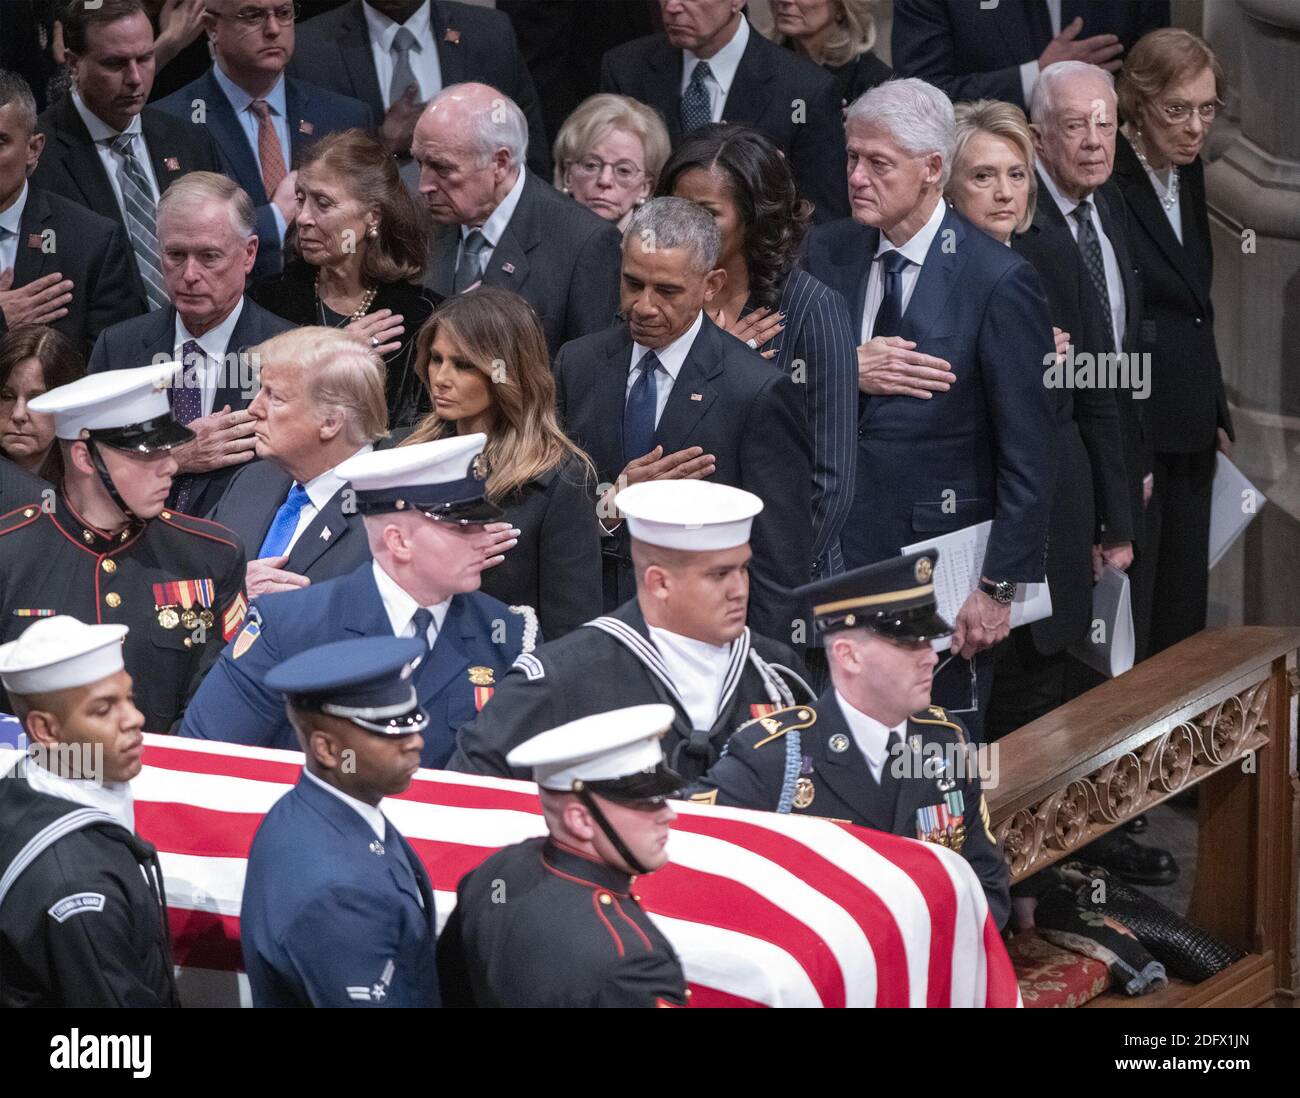 Dignitaries pay their respects as the casket containing the remains of the late former United States President George H.W. Bush at the National funeral service in his honor at the Washington National Cathedral in Washington, DC on Wednesday, December 5, 2018. Front row: United States President Donald J. Trump, first lady Melania Trump, former US President Barack Obama, former US President Bill Clinton, former US Secretary of State Hillary Rodham Clinton, former US President Jimmy Carter and former first lady Rosalynn Carter. Second row: former US Vice President Dan Quayle, Marilyn Quayle, form Stock Photo